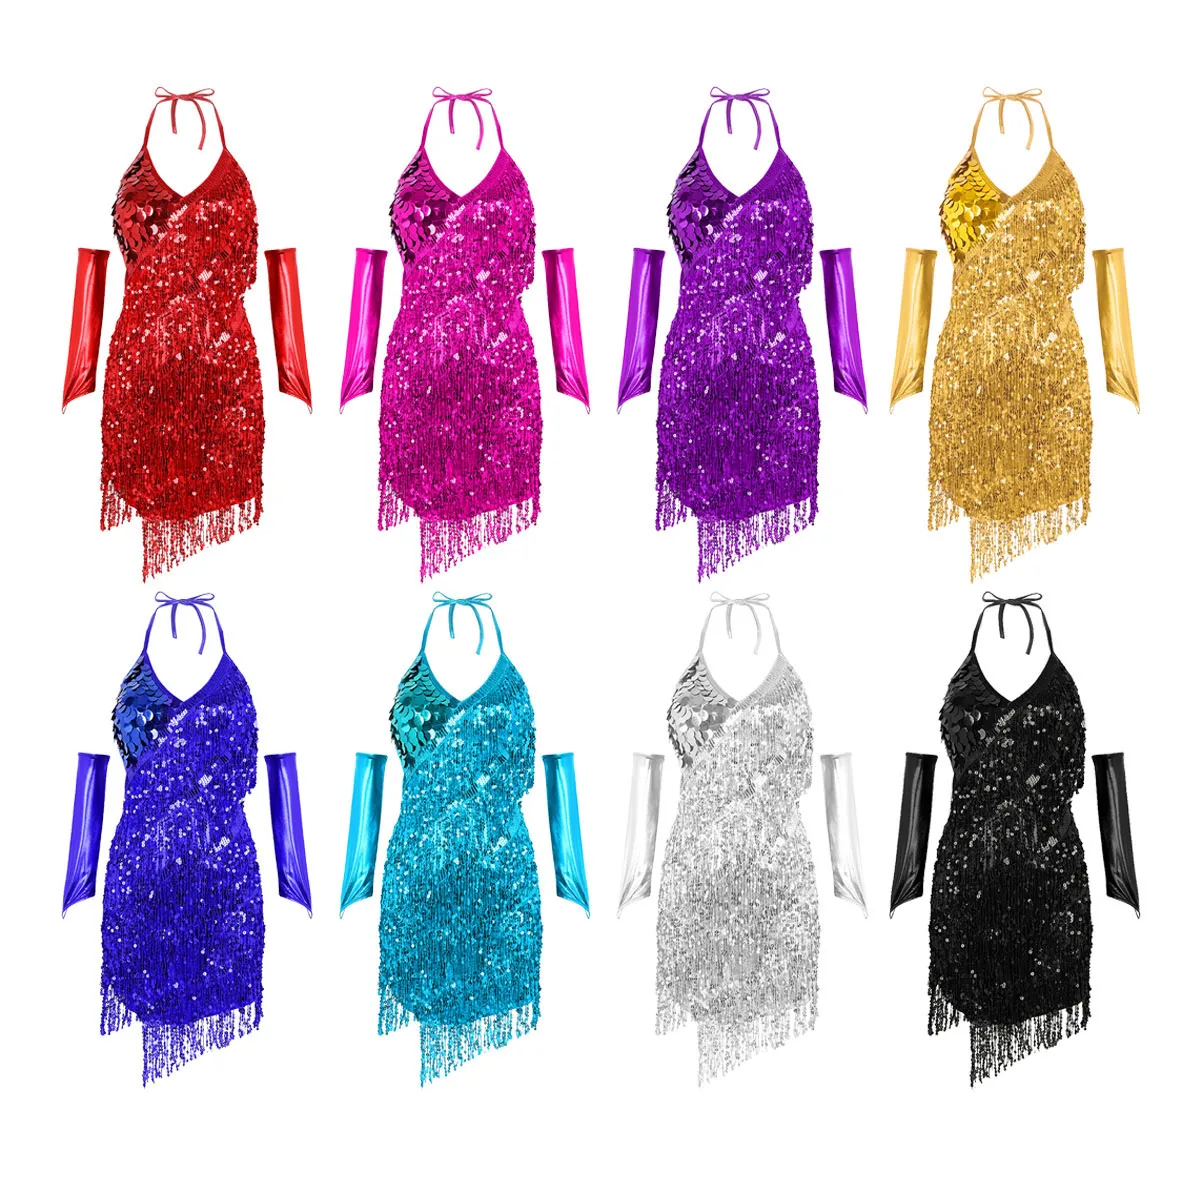 

Womens Latin Dance Dress Sparkling Sequined Tassel Latin Dress Halter Neck Self-Tie Asymmetric Dress with a Pair of Hand Sleeves